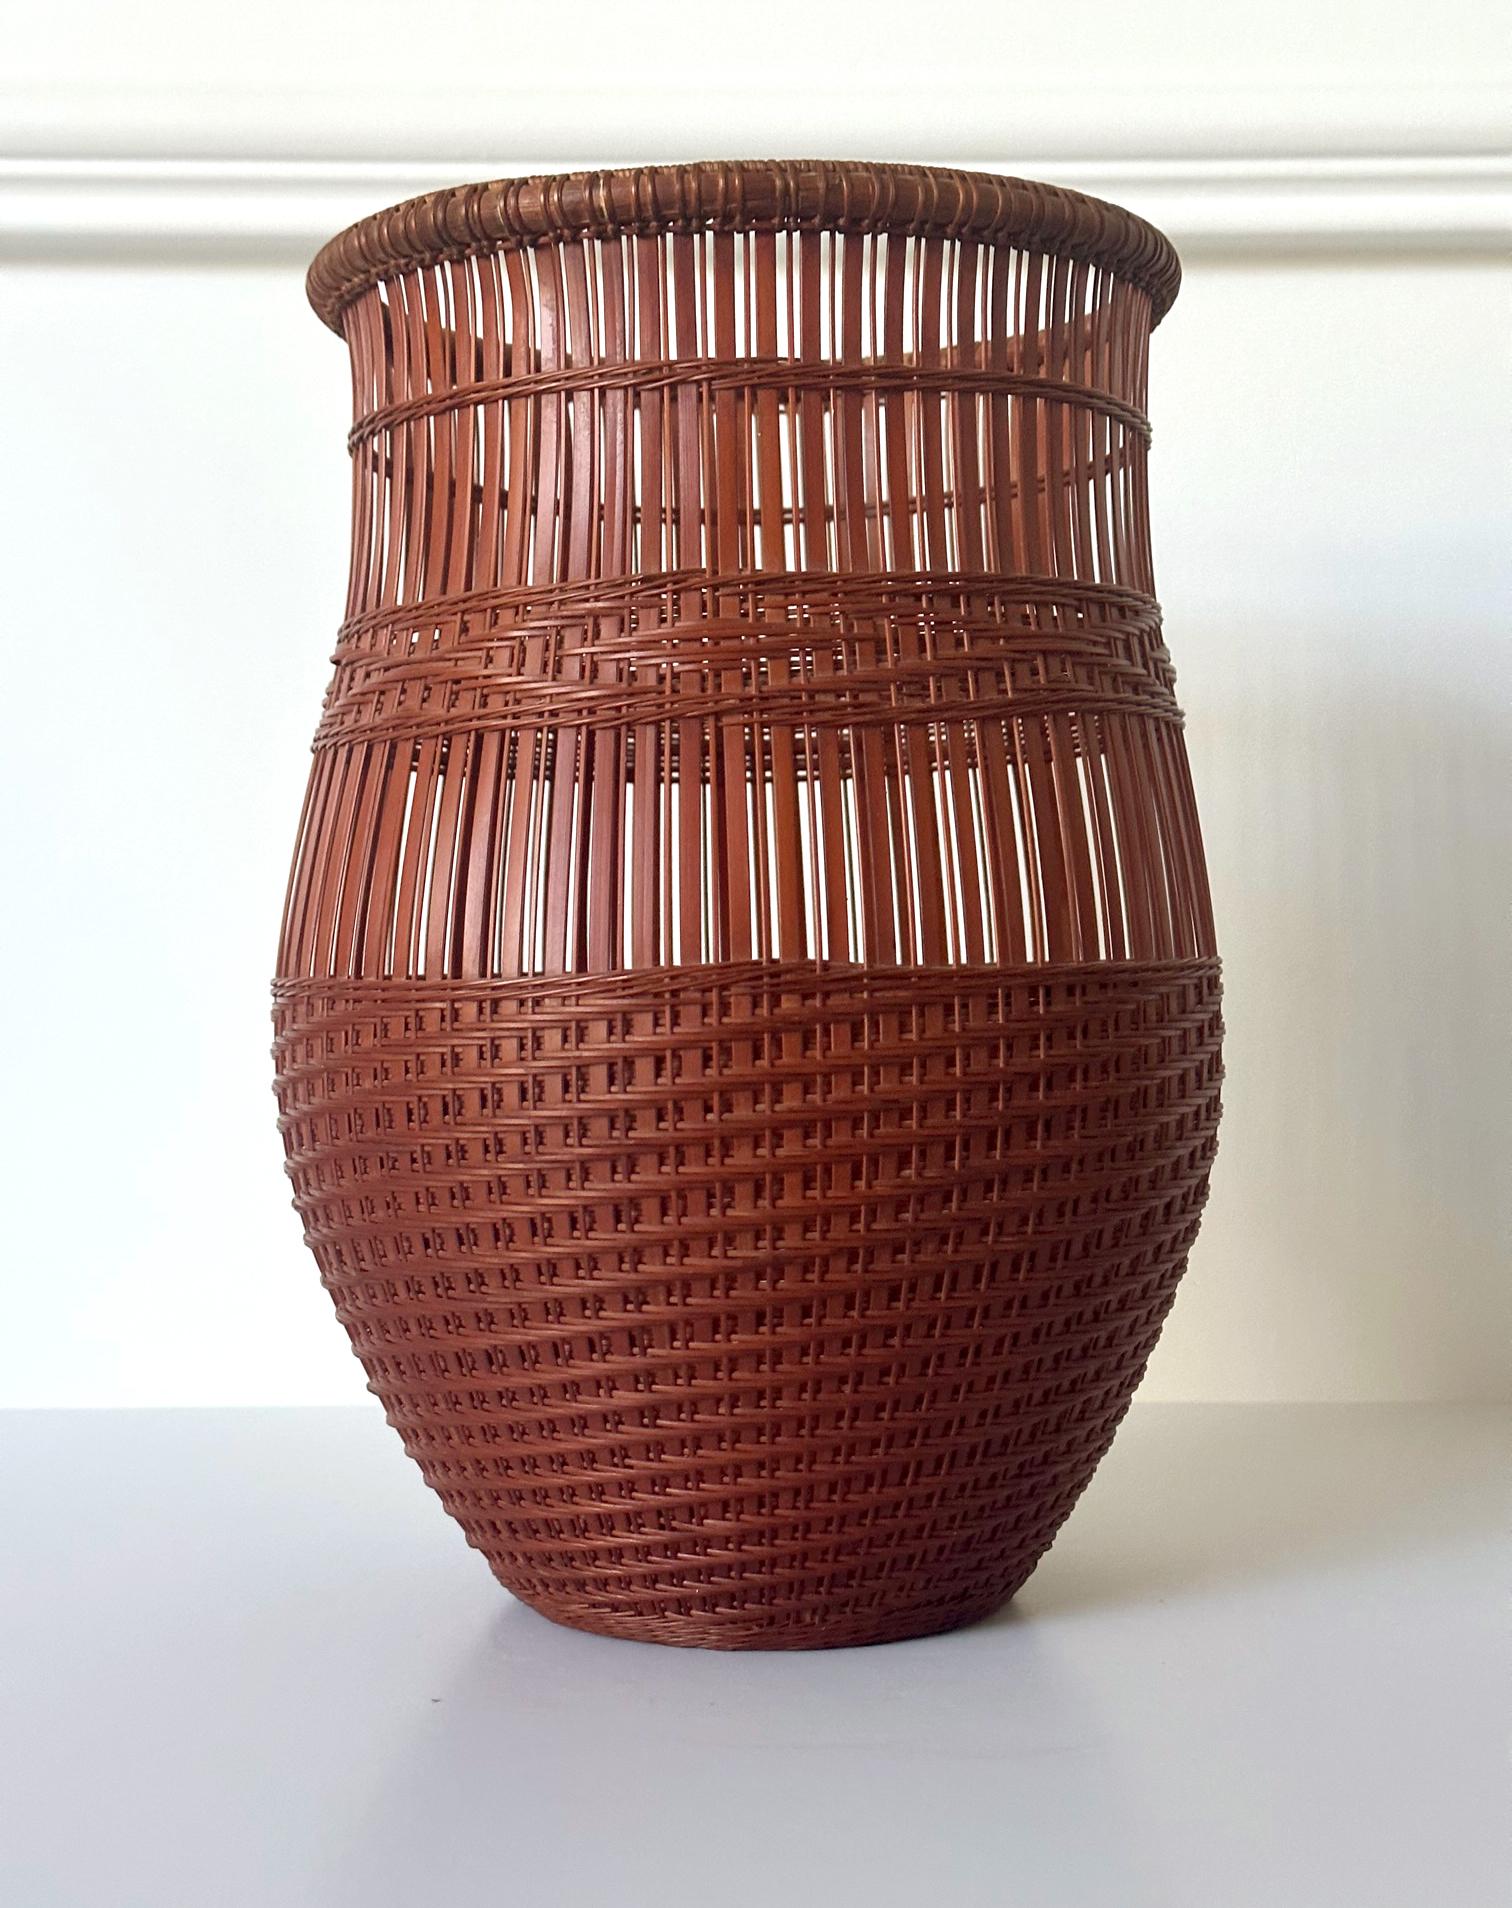 A Japanese Ikebana basket woven by bamboo artist Abe Motoshi (Japanese, b. 1942). In an organic vase form with elegant, curved wall with reinforced rim. The shape calls to mind the Fishermen's trap. The basket was constructed with Madake bamboo and